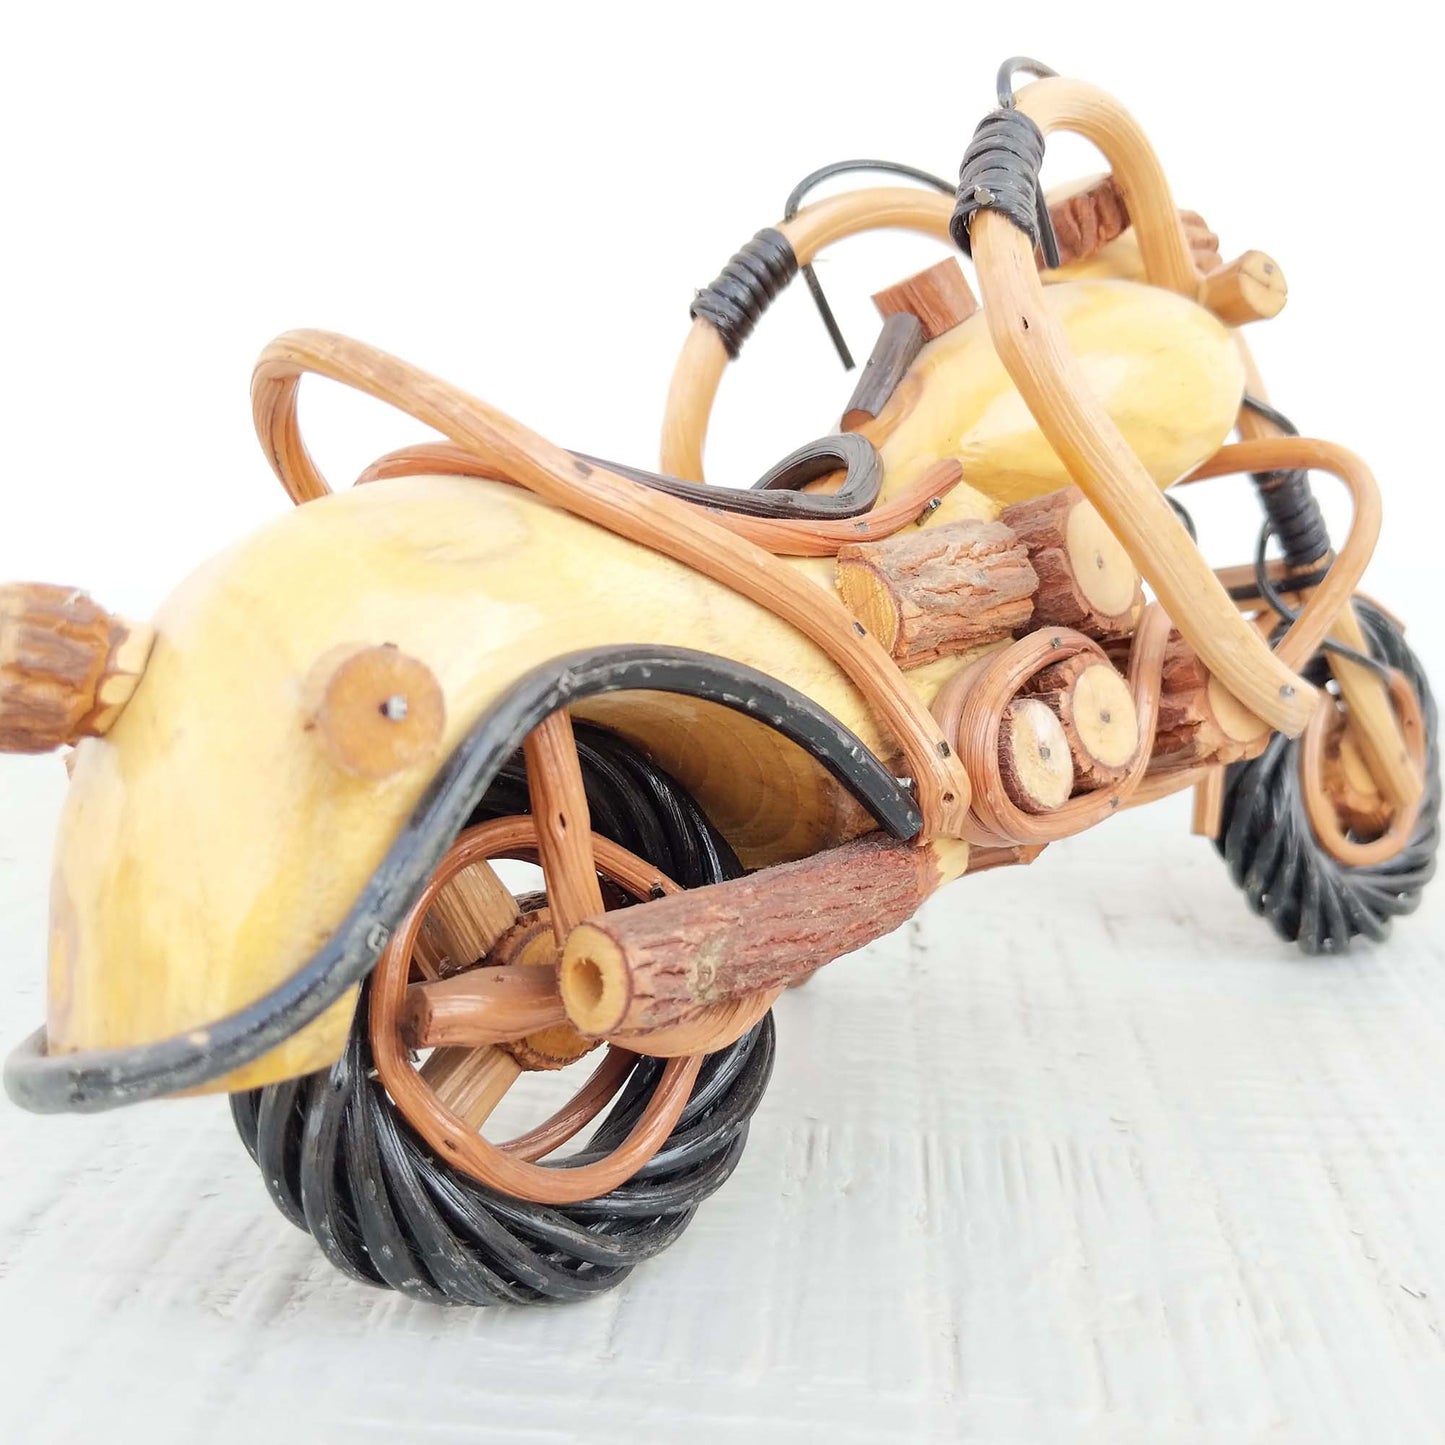 Cruiser bike hand-crafted from wood